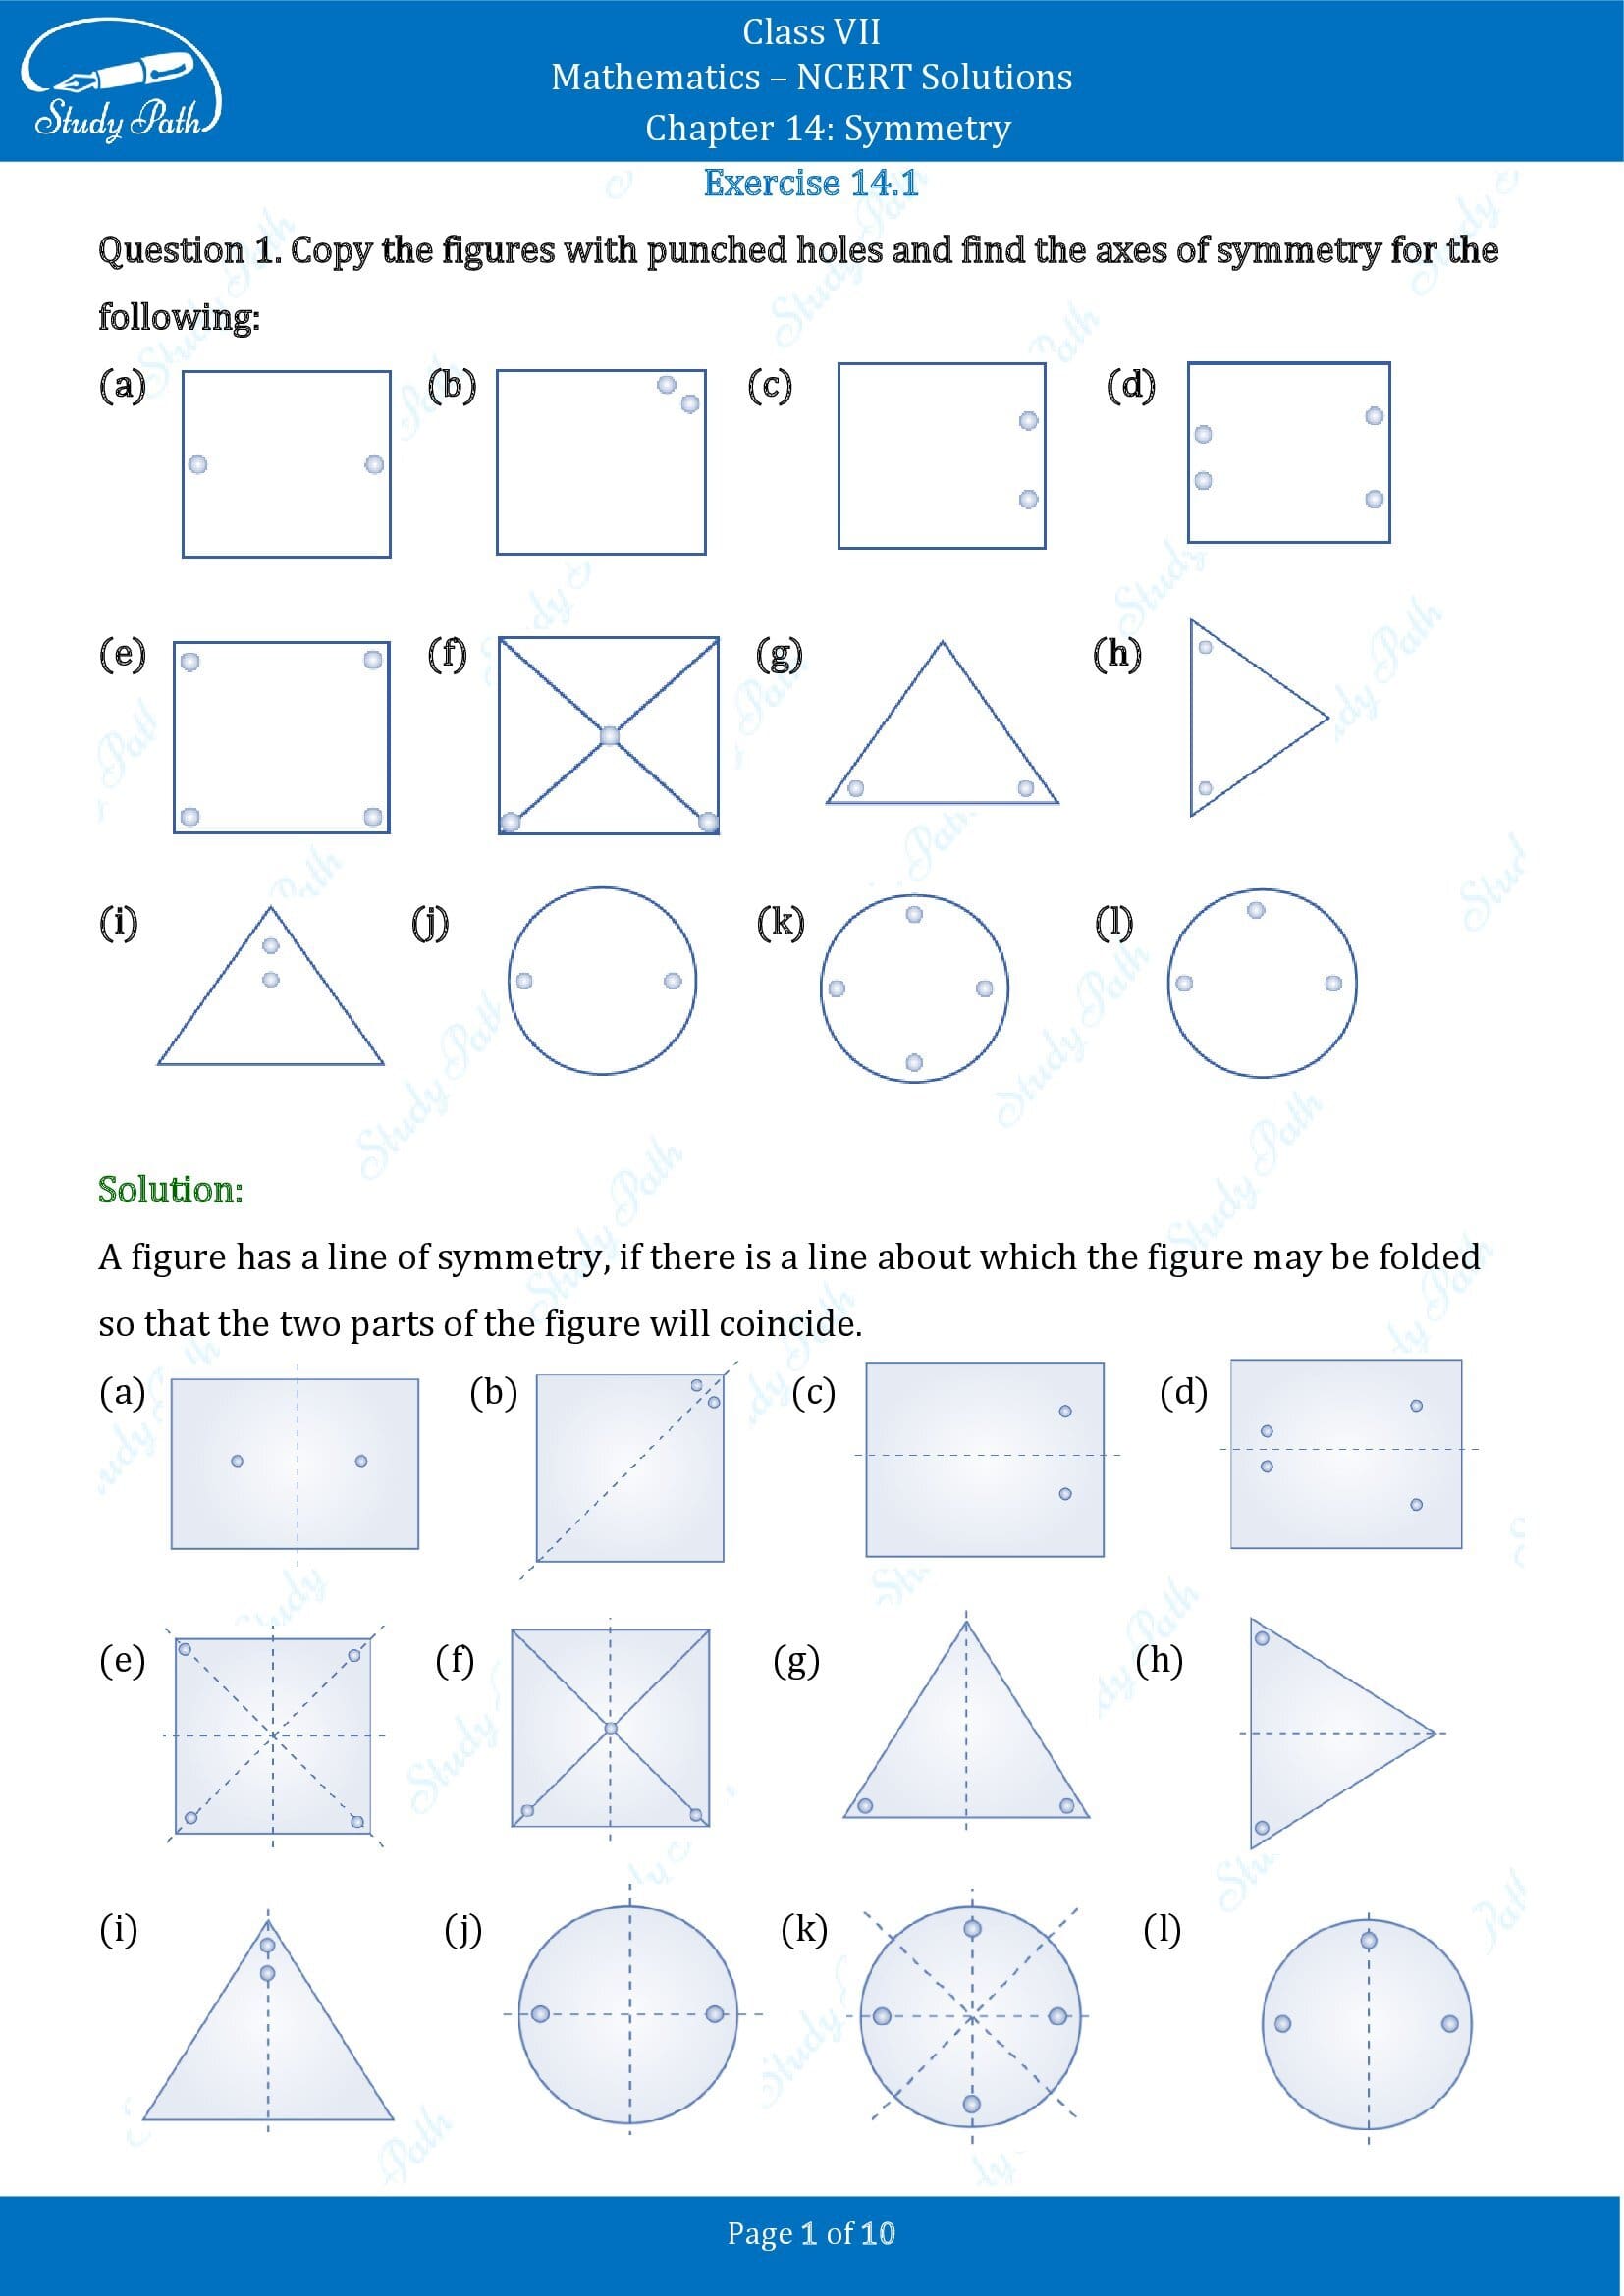 NCERT Solutions for Class 7 Maths Chapter 14 Symmetry Exercise 14.1 00001